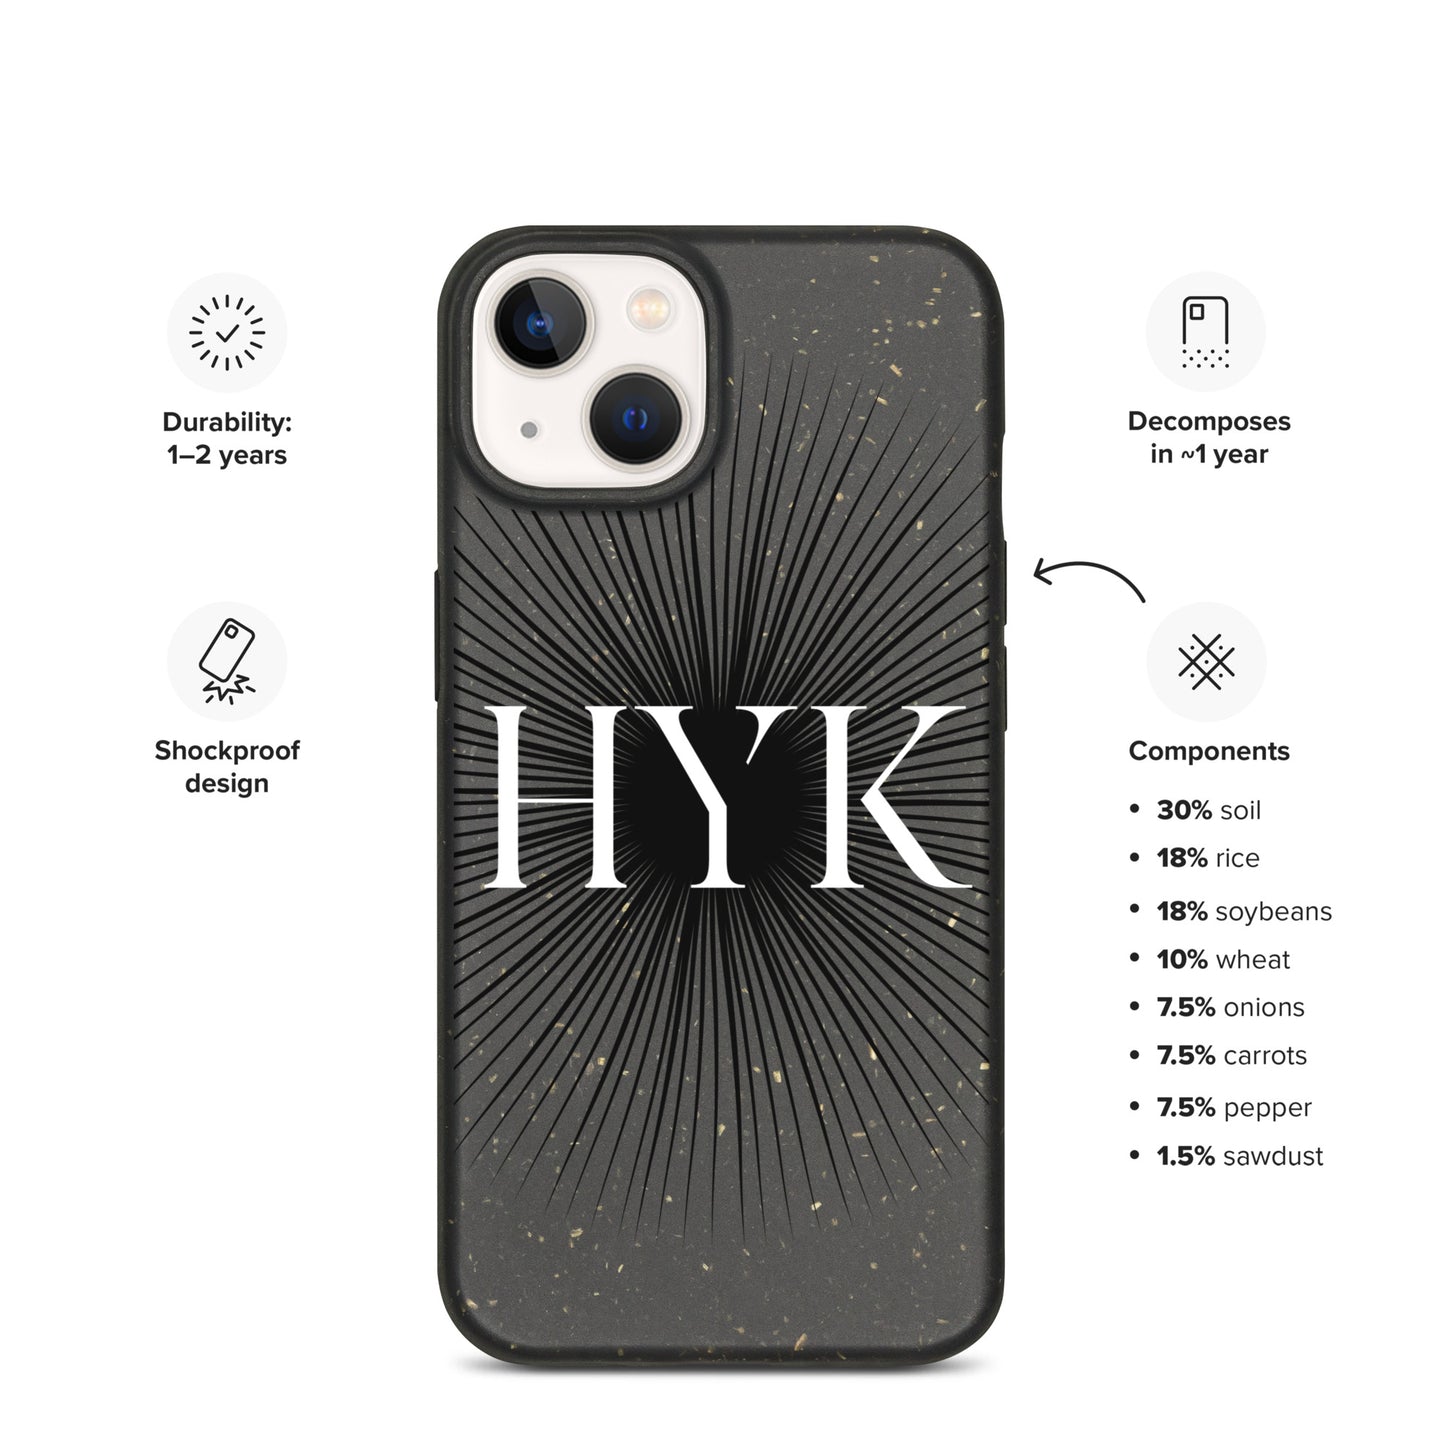 high quality sustainable apple iphone mobile phone case